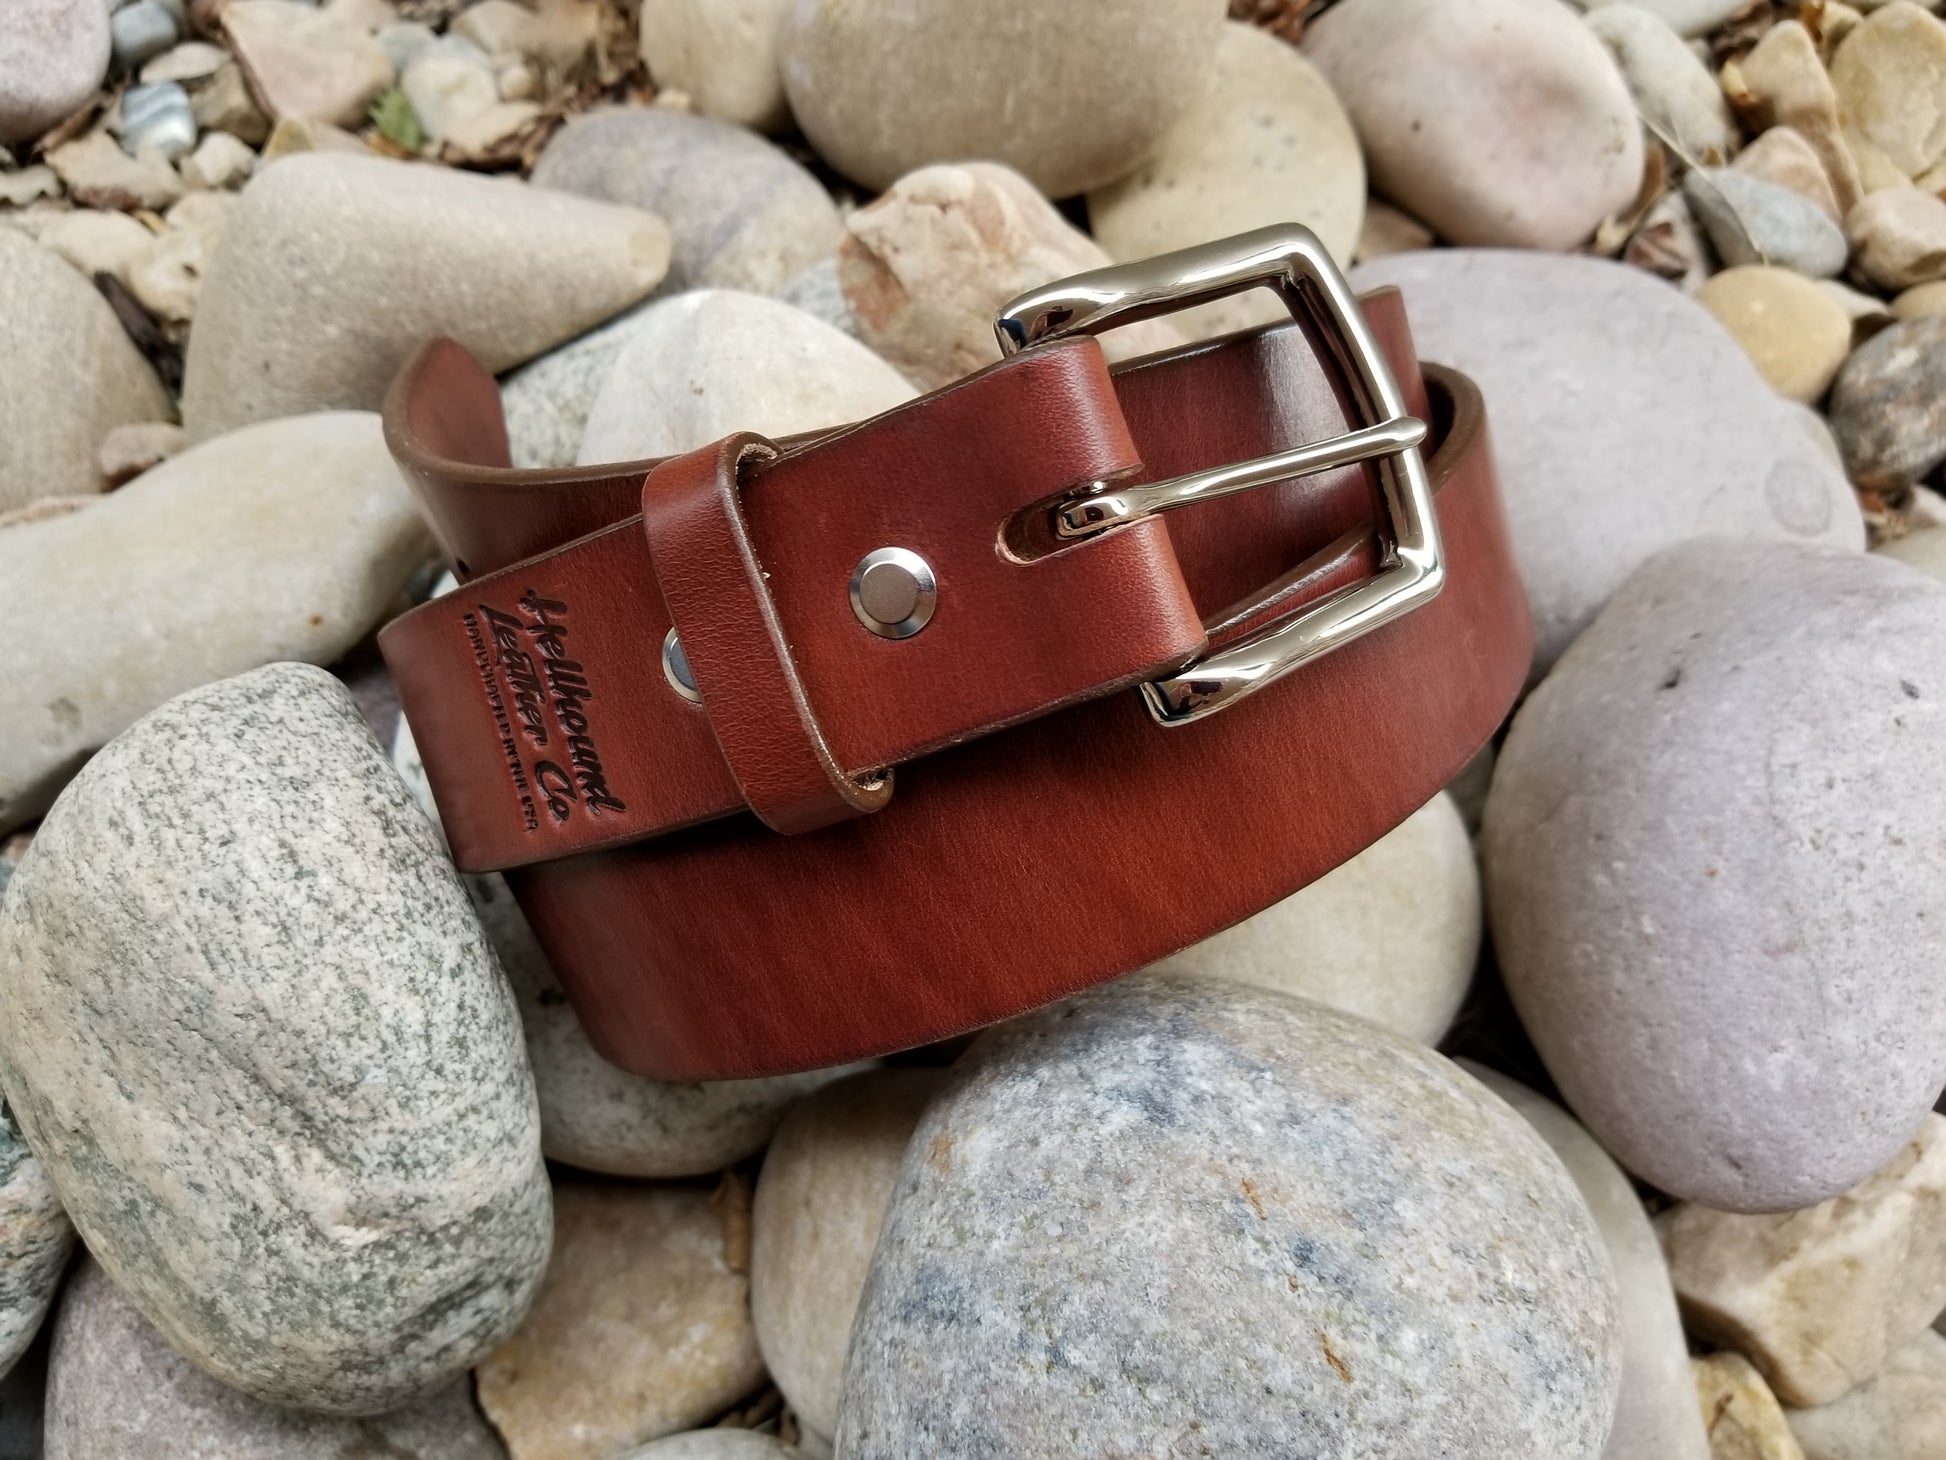 Classic Leather Belt - Brown